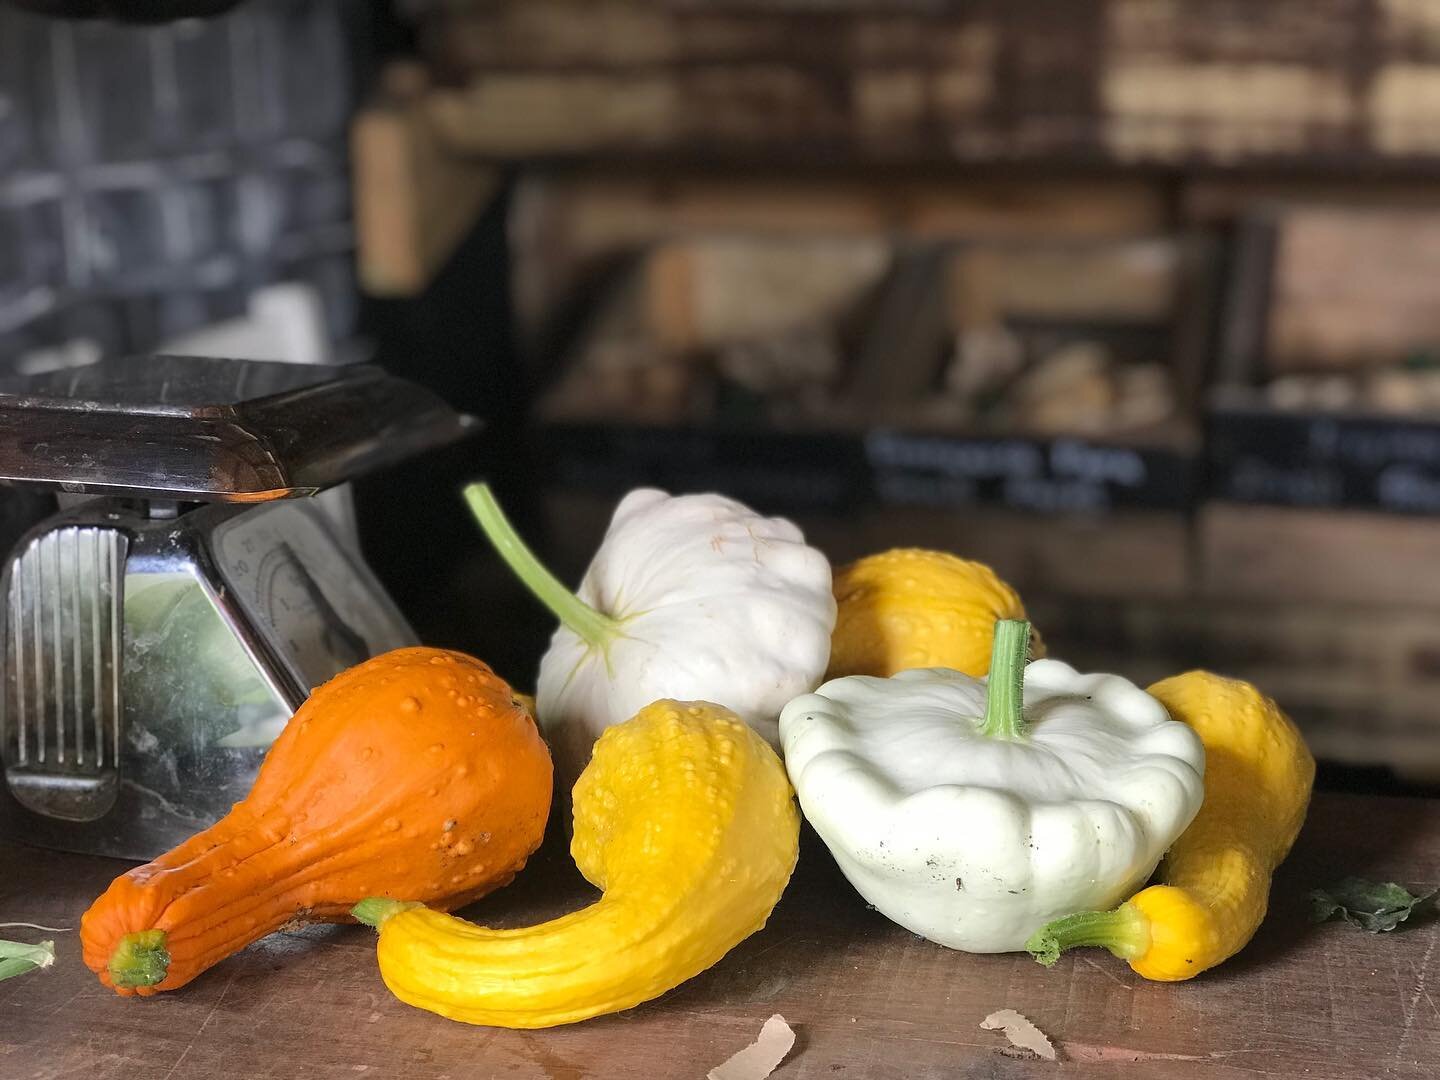 Some of the treats of peak harvest time&hellip;. A Summer Crookneck squash from @wales_seed_hub and a beautiful pattison squash from @theseedcooperative. 

It&rsquo;s hard to keep up with harvesting what the garden and the hedgerows are providing rig